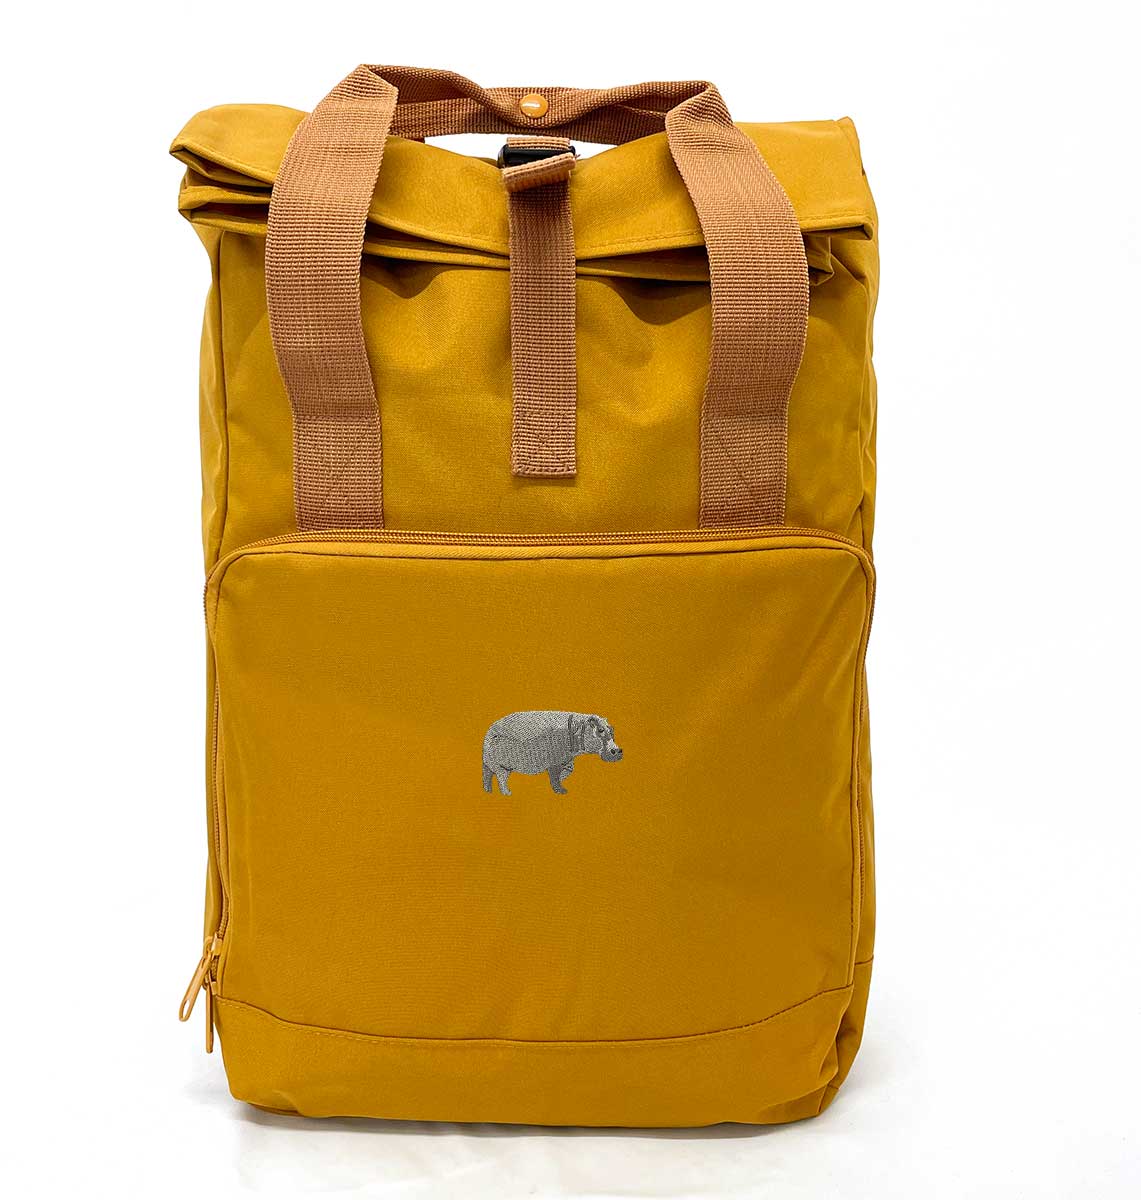 Hippo Large Roll-top Laptop Recycled Backpack - Blue Panda